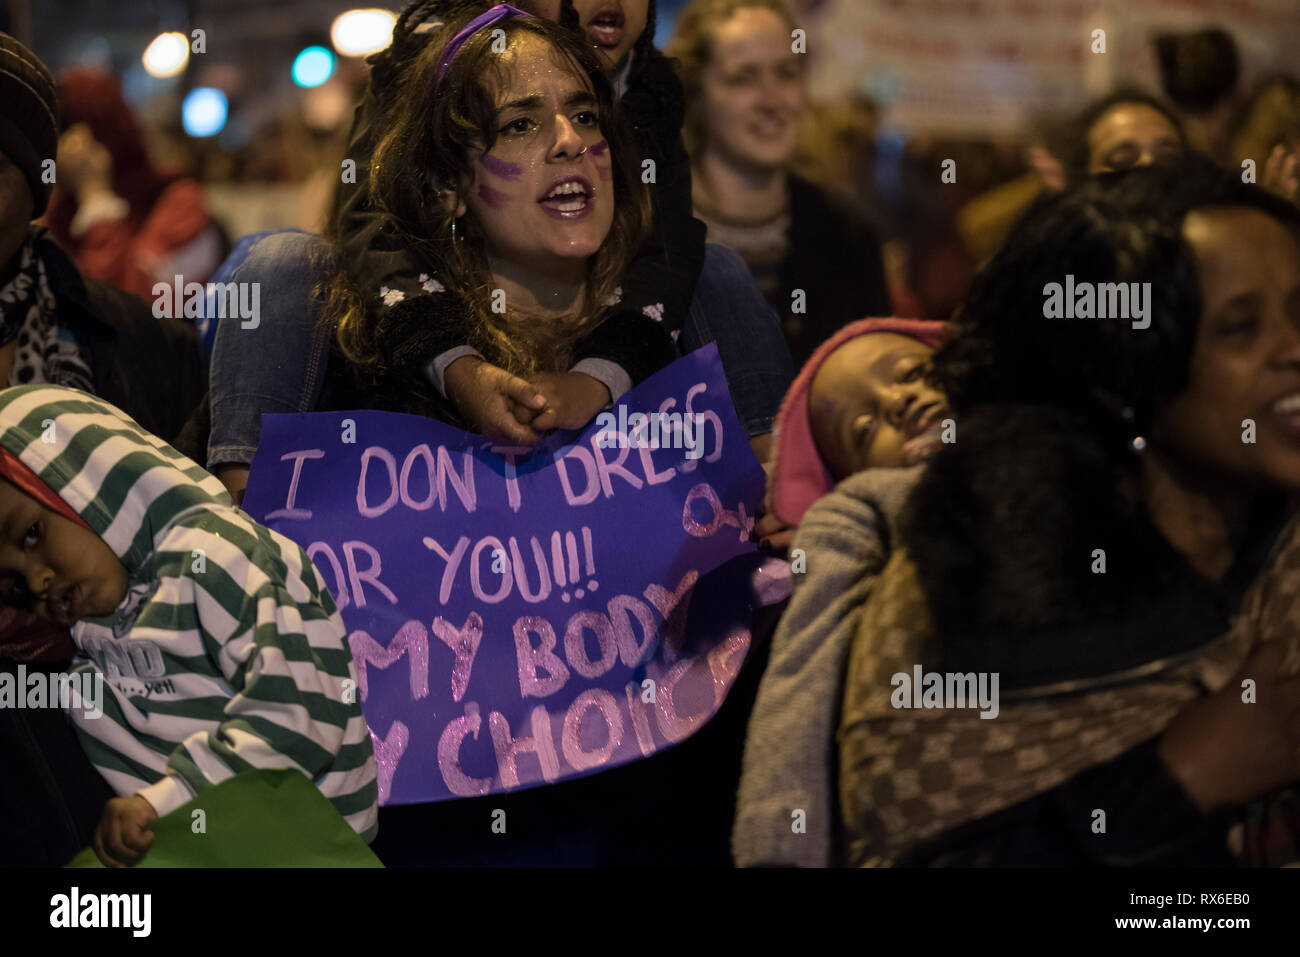 Athens, Greece. 8th Mar 2019. Women and men march in the streets of Athens holding banners and shouting slogans against patriarchy. Feminist, leftist and human rights organizations staged a demonstration to honor International Women's Day and demand equal rights and respect. Credit: Nikolas Georgiou/Alamy Live News Stock Photo